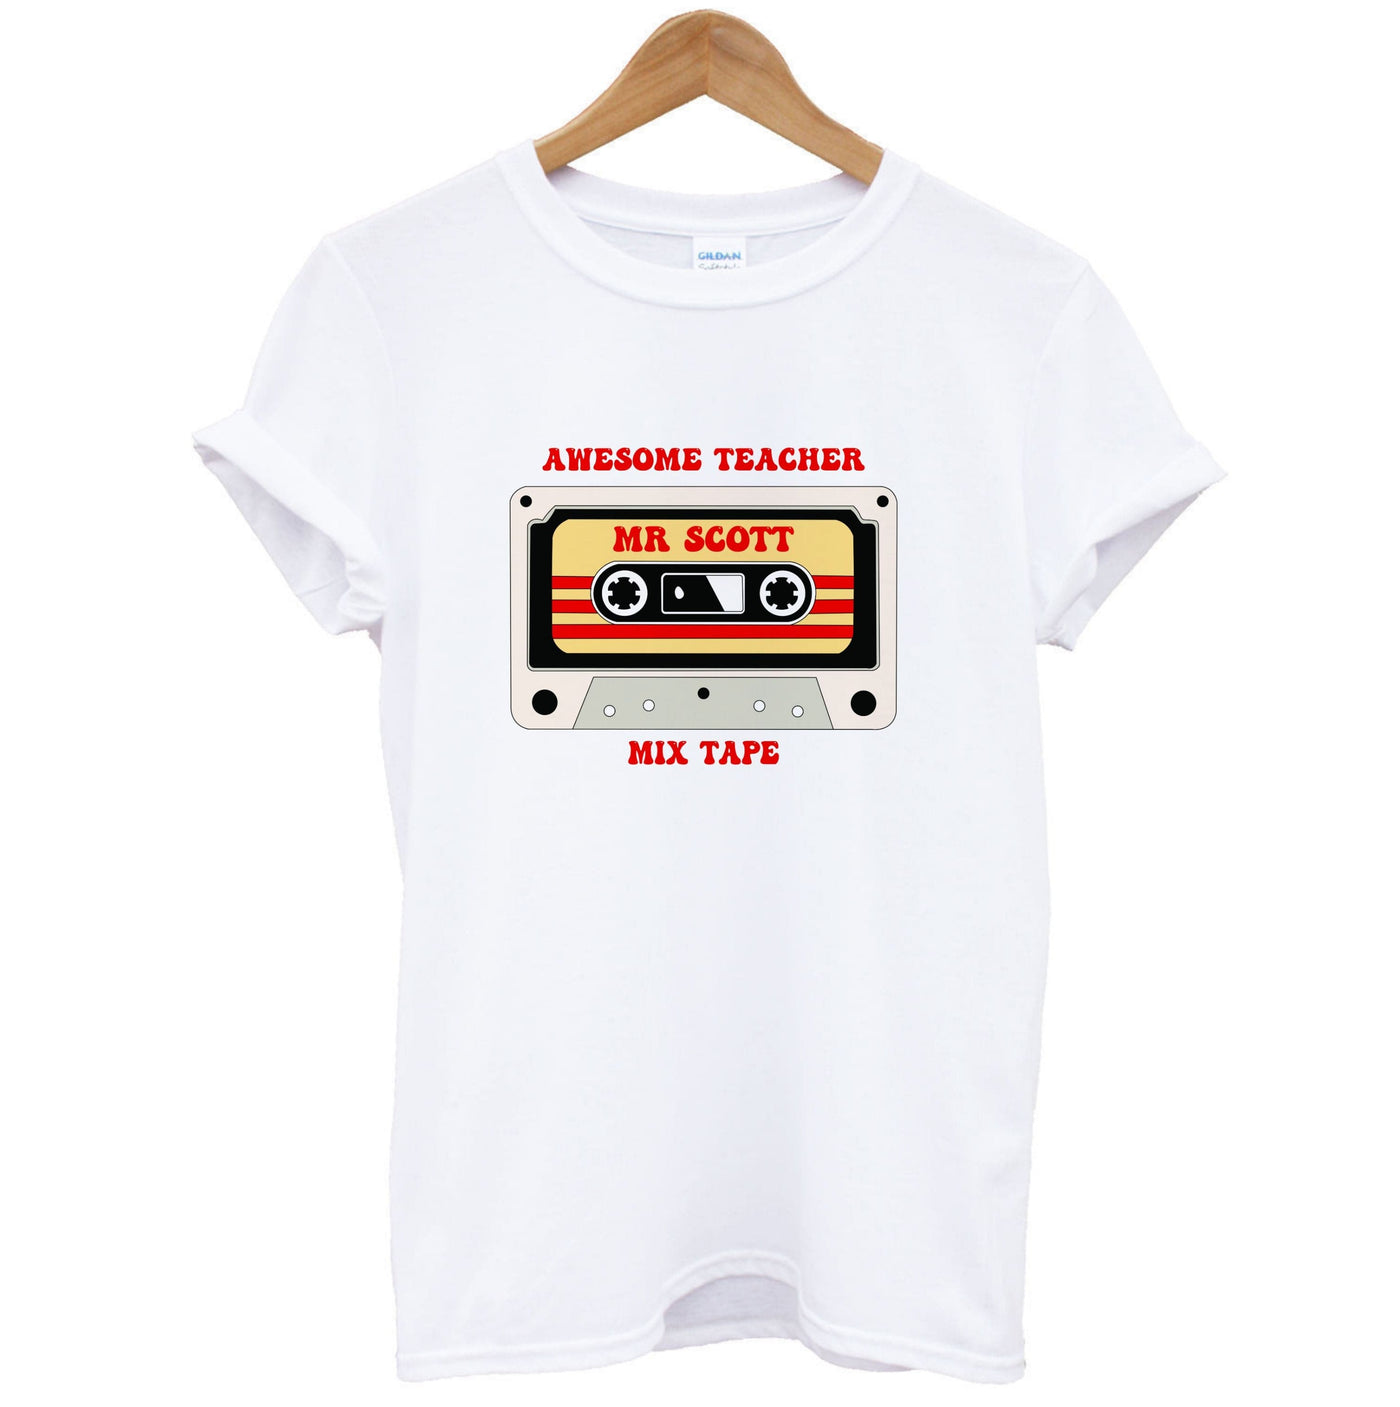 Awesome Teacher Mix Tape - Personalised Teachers Gift T-Shirt